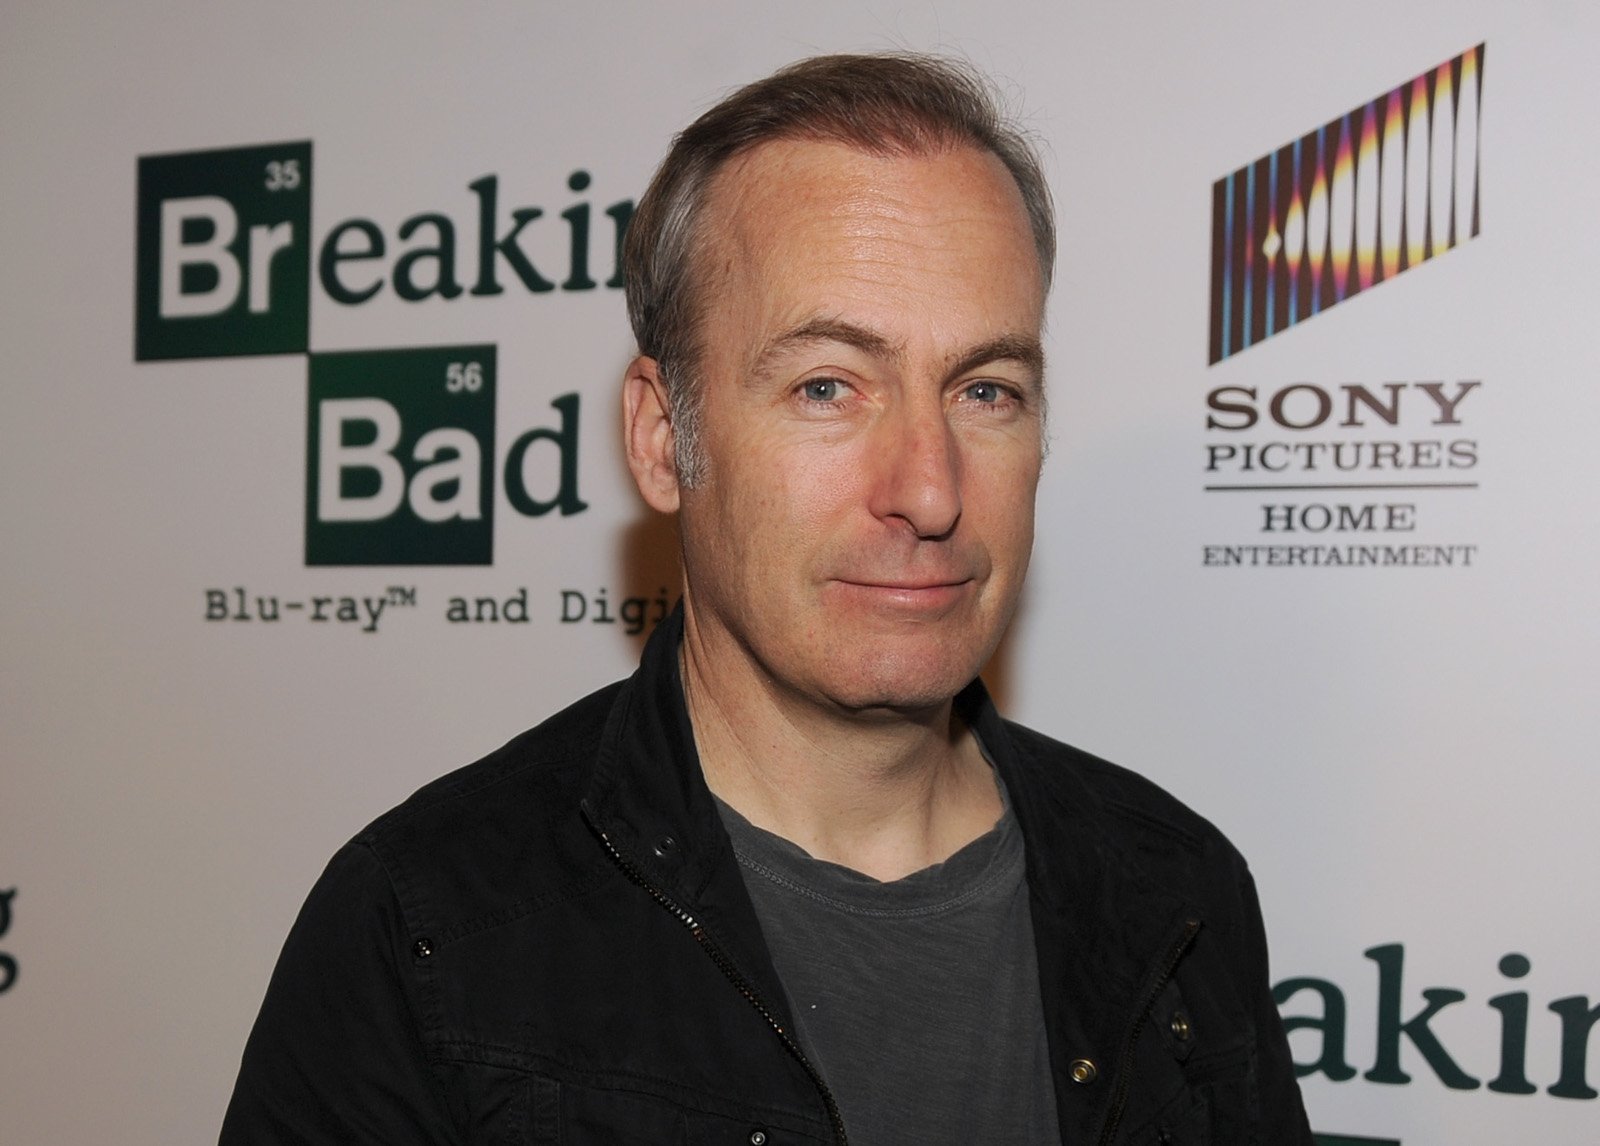 'Better Call Saul' star Bob Odenkirk stands in front of a 'Breaking Bad' and AMC wall wearing a grey shirt and black jacket